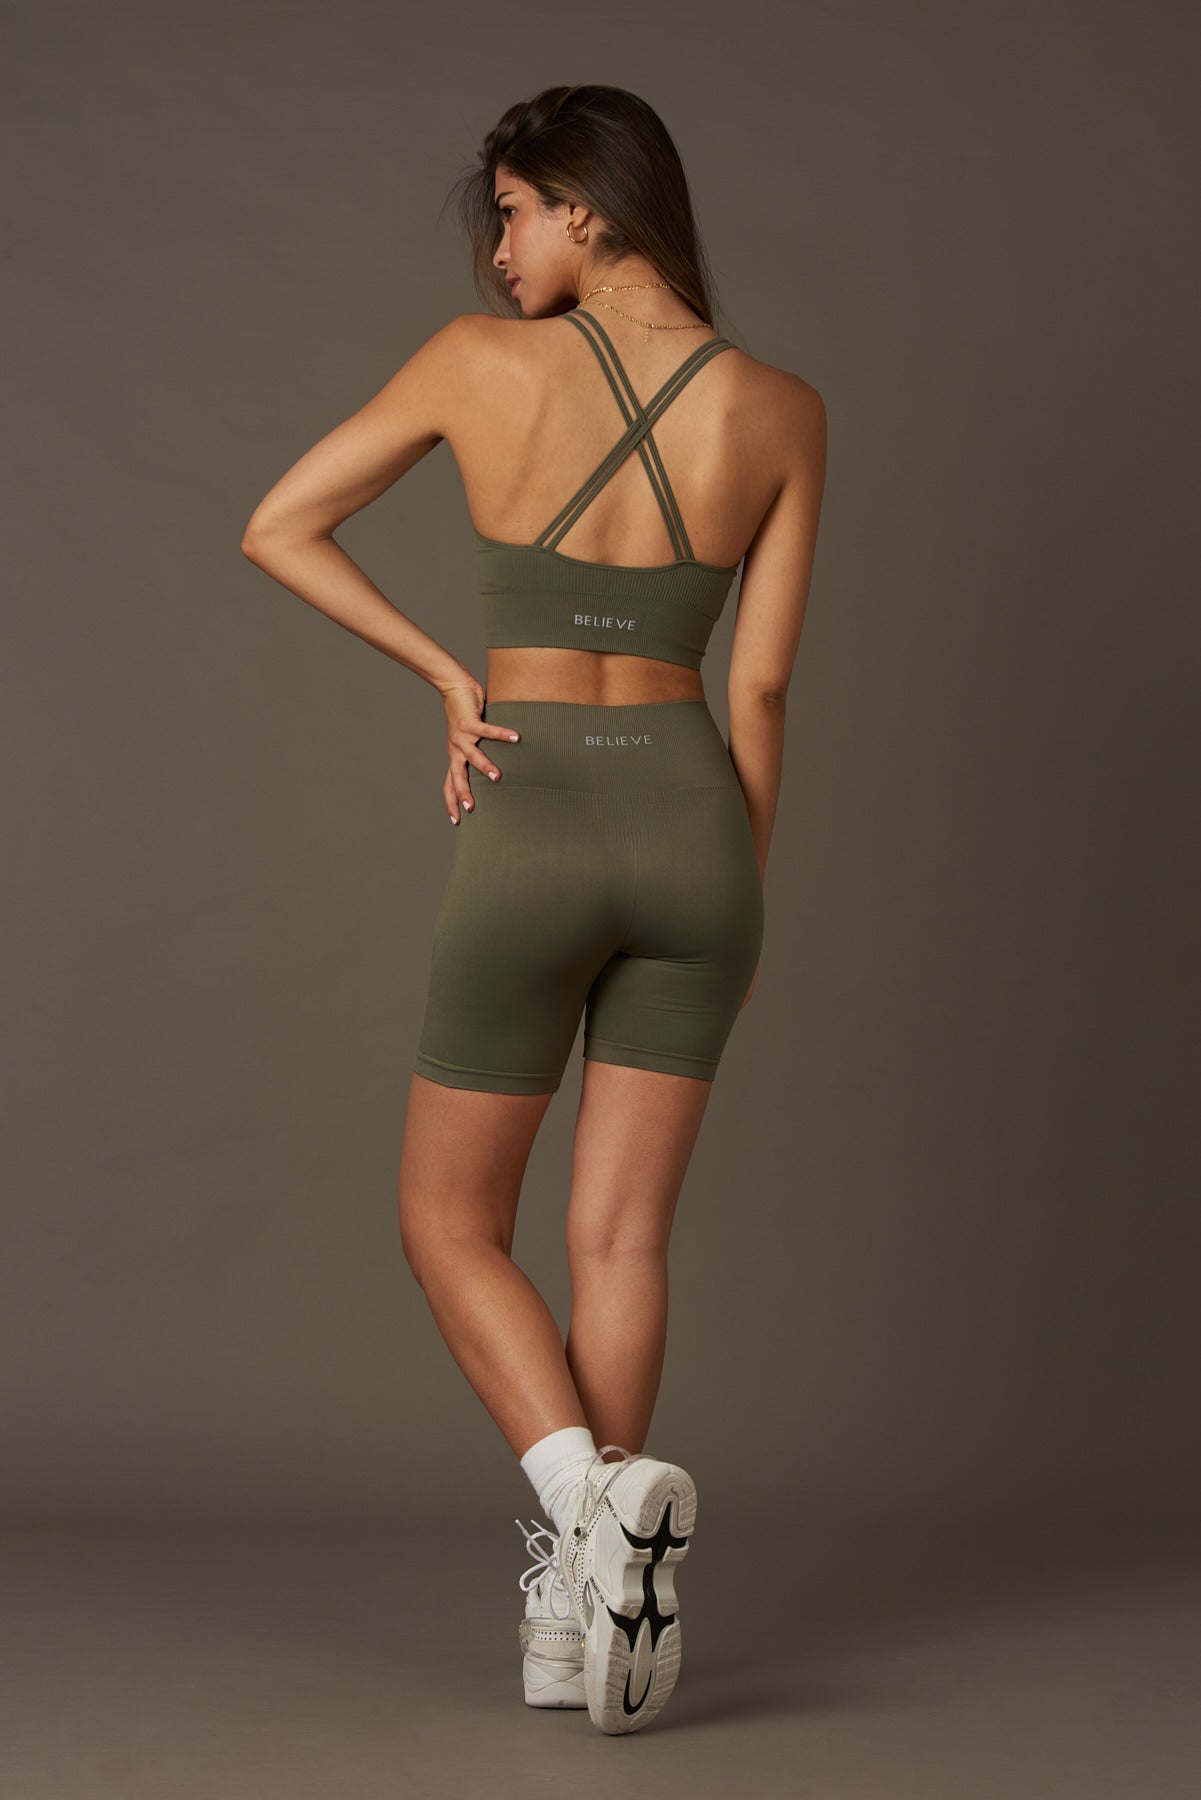 Solar Bra at Caqui-Bras-Shop Clothing Sustainable Recycled Yoga Leggings Women's On-line Barcelona Believe Athletics Sustainable Recycled Yoga Clothes